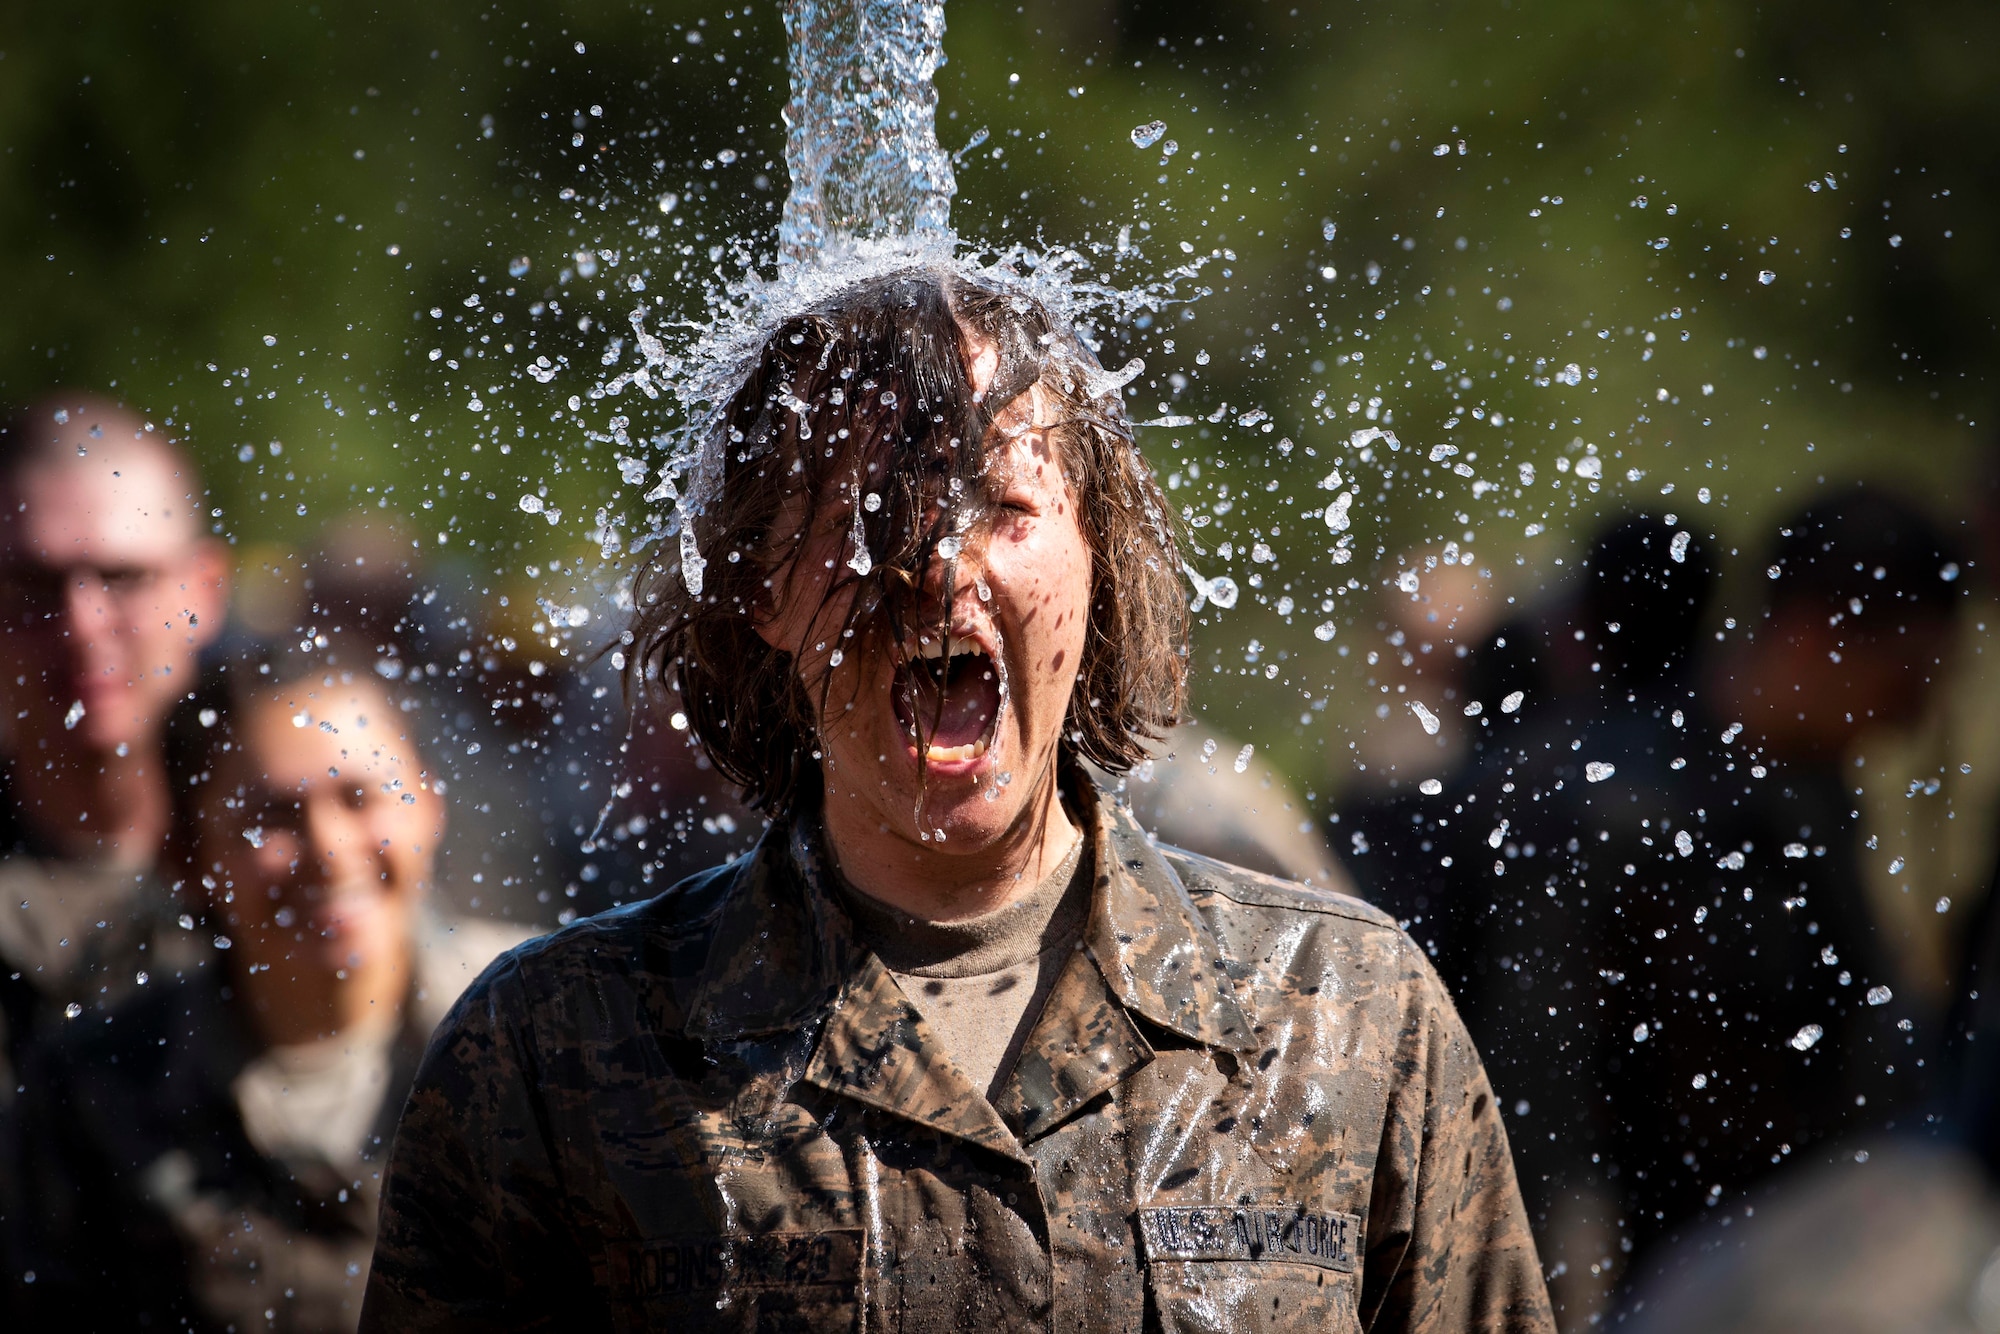 Cadets from the class of 2023 immerse themselves in water after completing the Assault Course